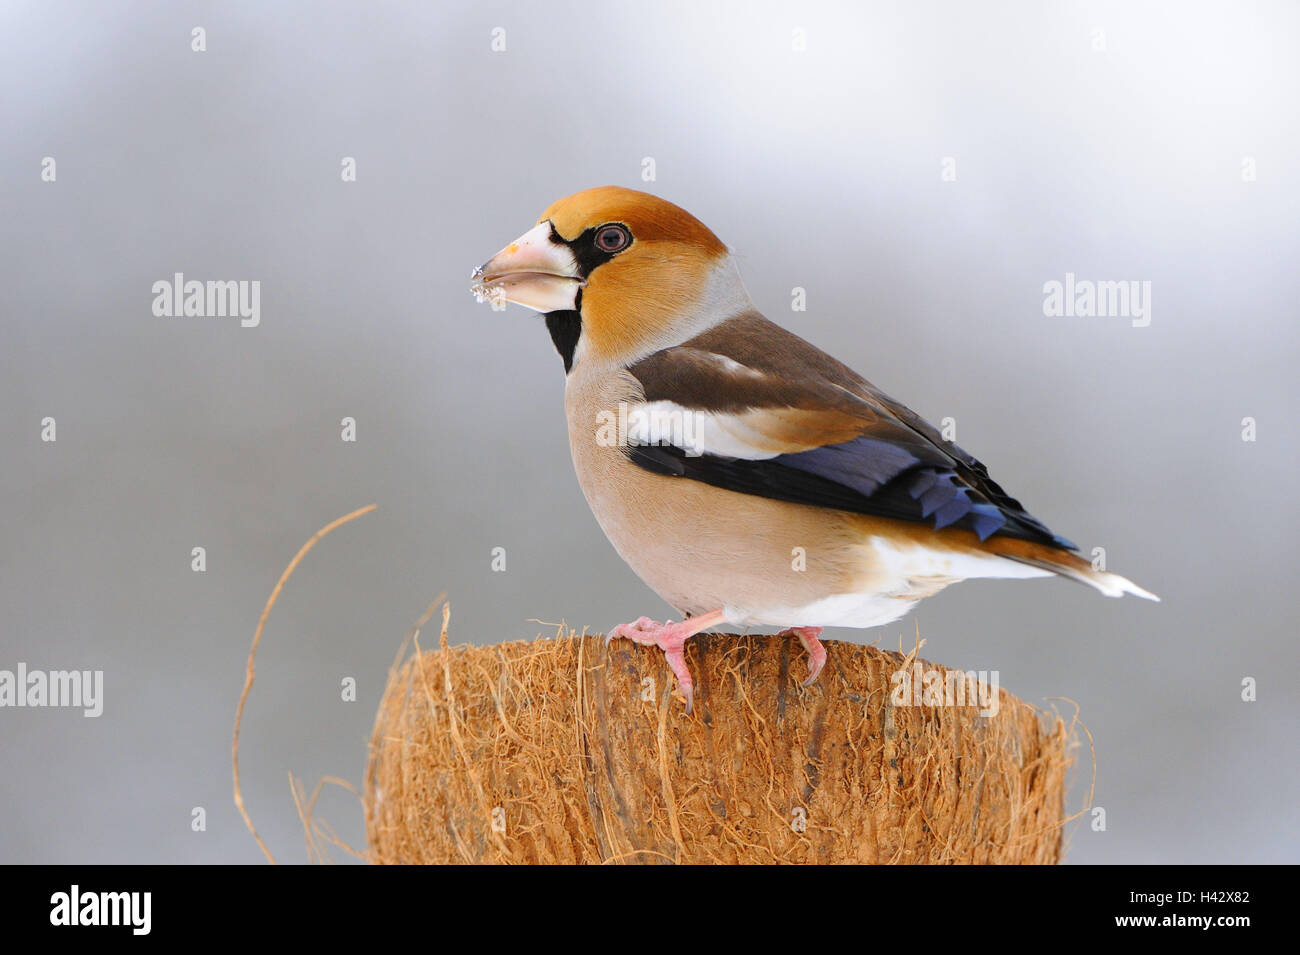 Hawfinch, Coccothraustes coccothraustes, feeding ground, coconut, winter, Stock Photo